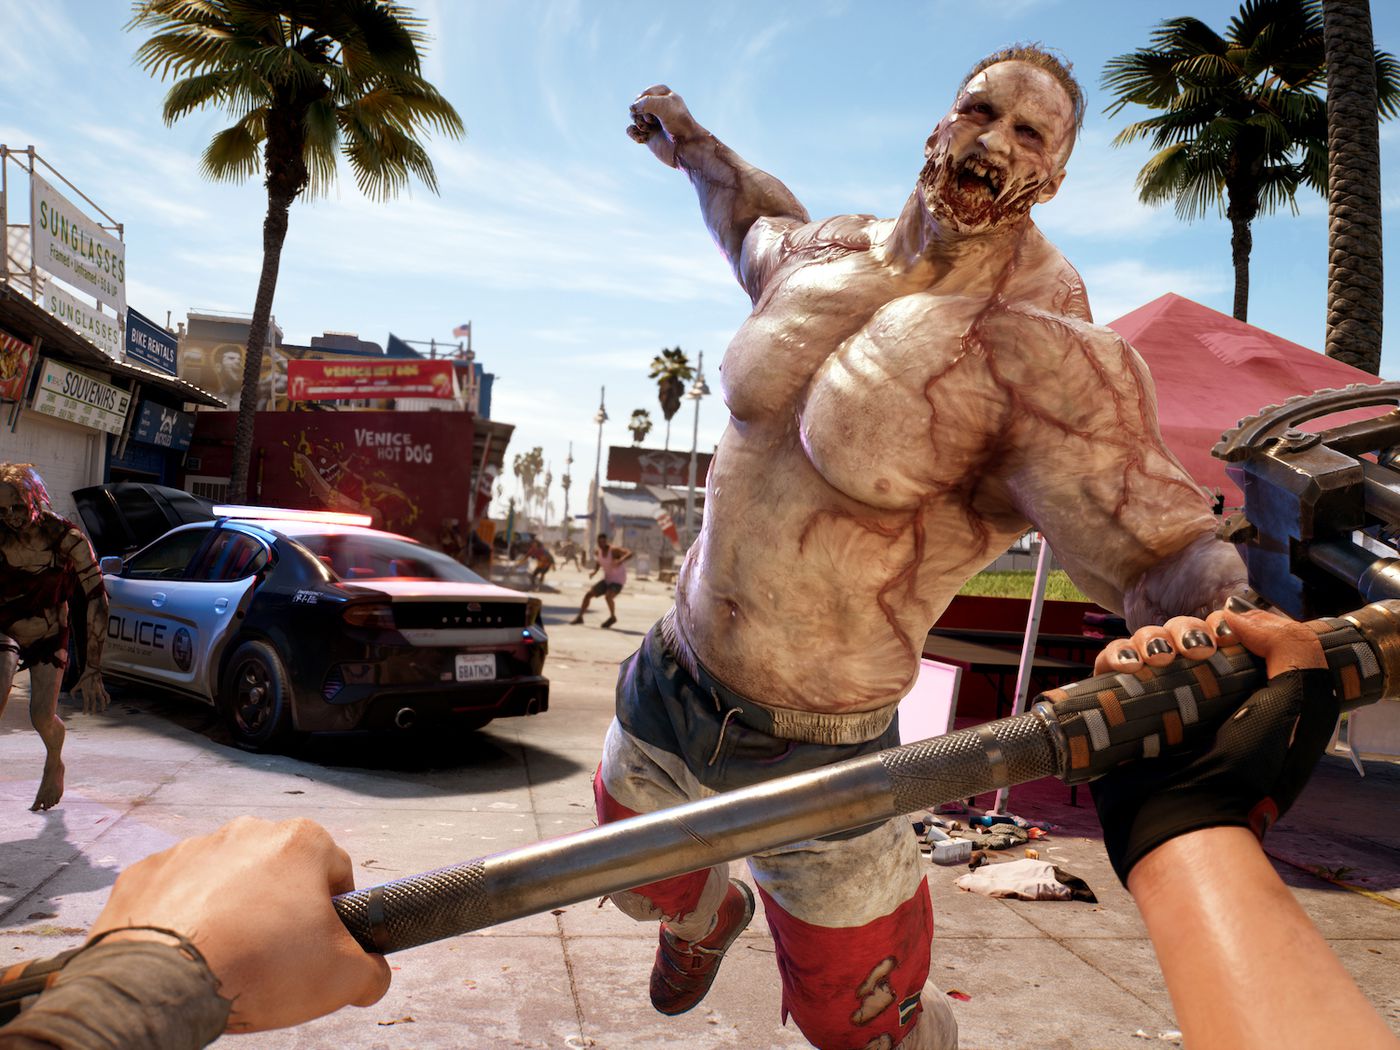 Dead Island 2 will let you taunt zombies with your voice, thanks to Amazon's Alexa